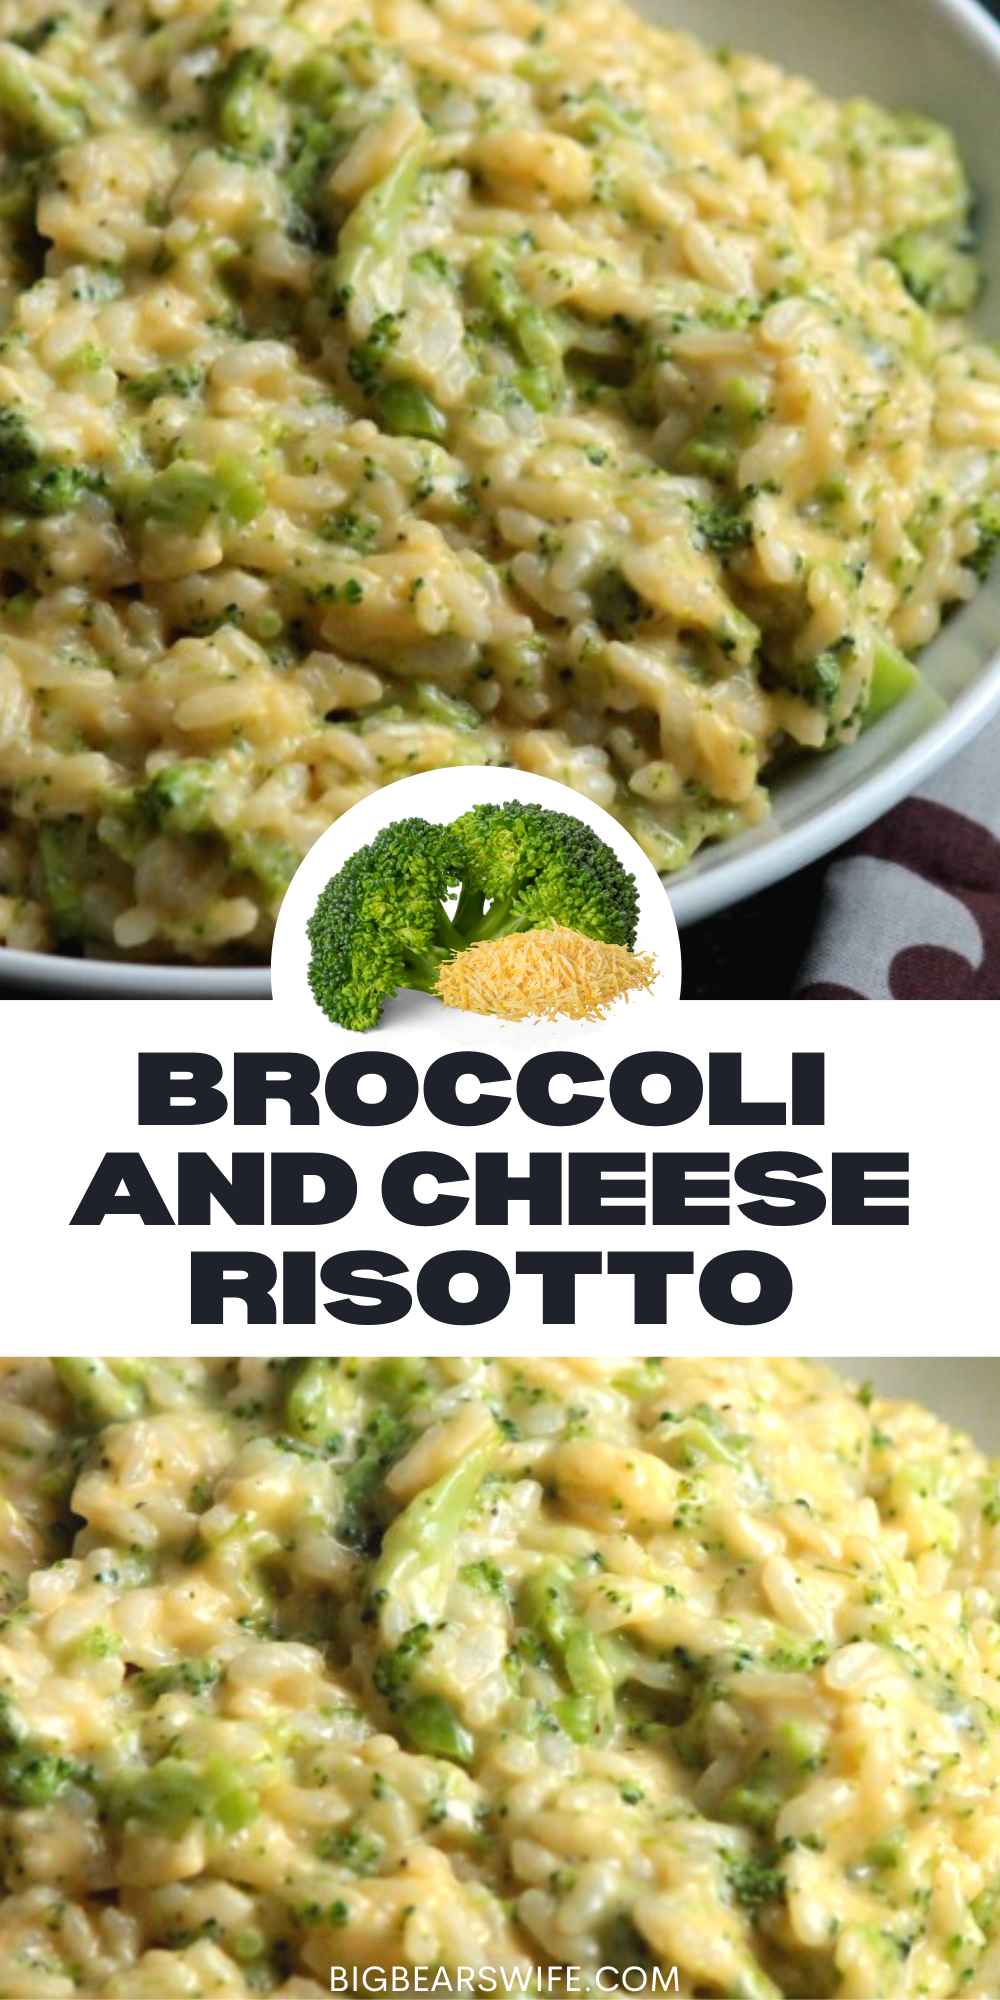 This Broccoli and Cheese Risotto is creamy and perfect with it’s cheese and bits of broccoli! It’s such a great comfort food and it’s easy to make at home!
 via @bigbearswife